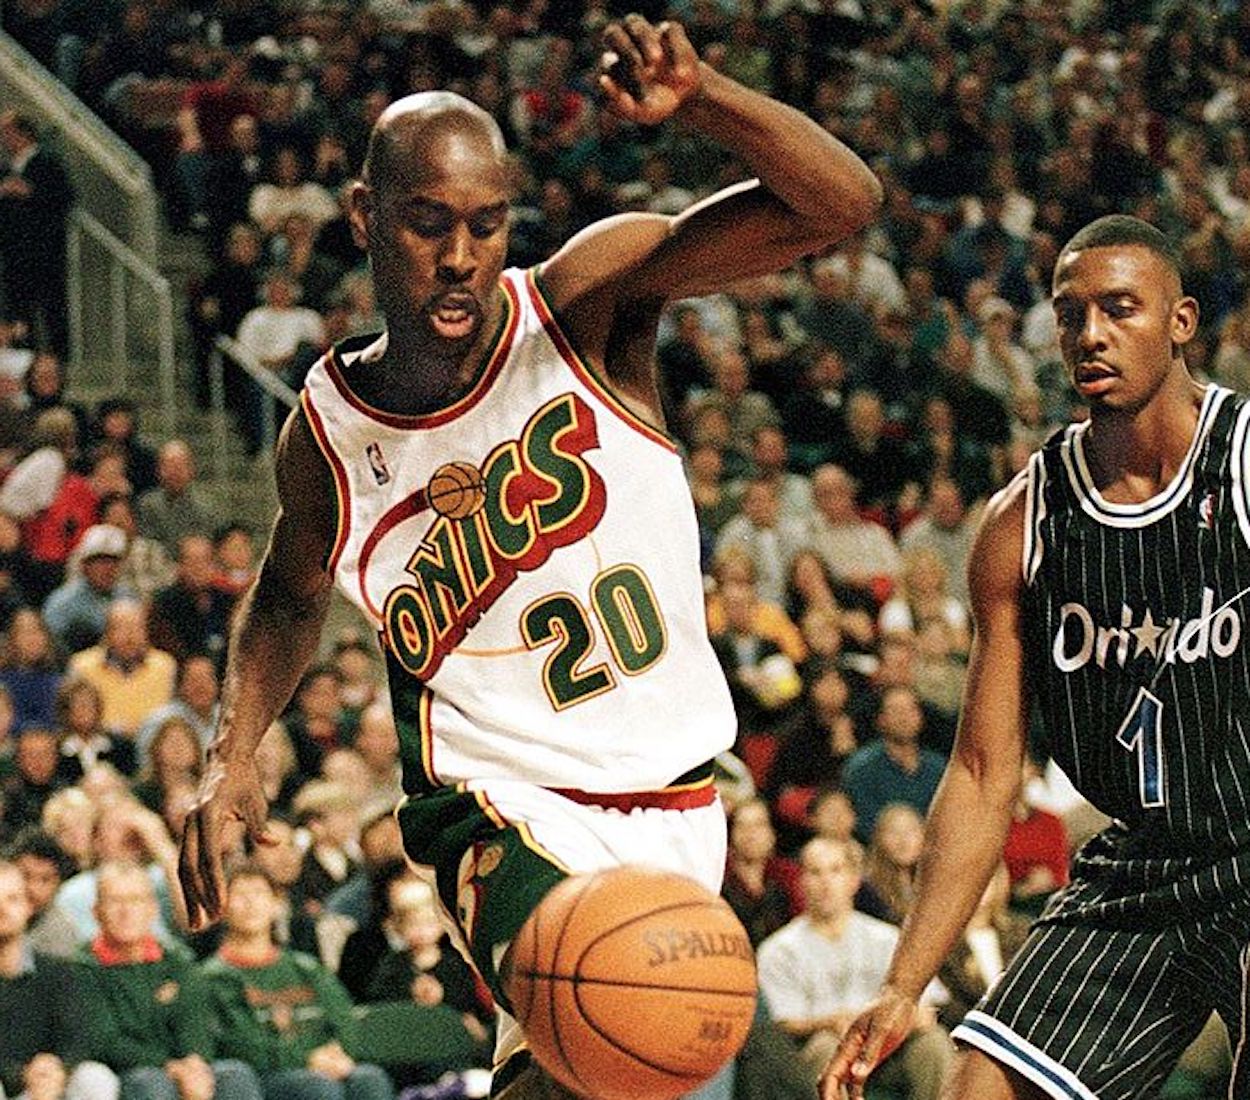 Gary Payton (L) and Penny Hardaway (R) battle for a loose ball.